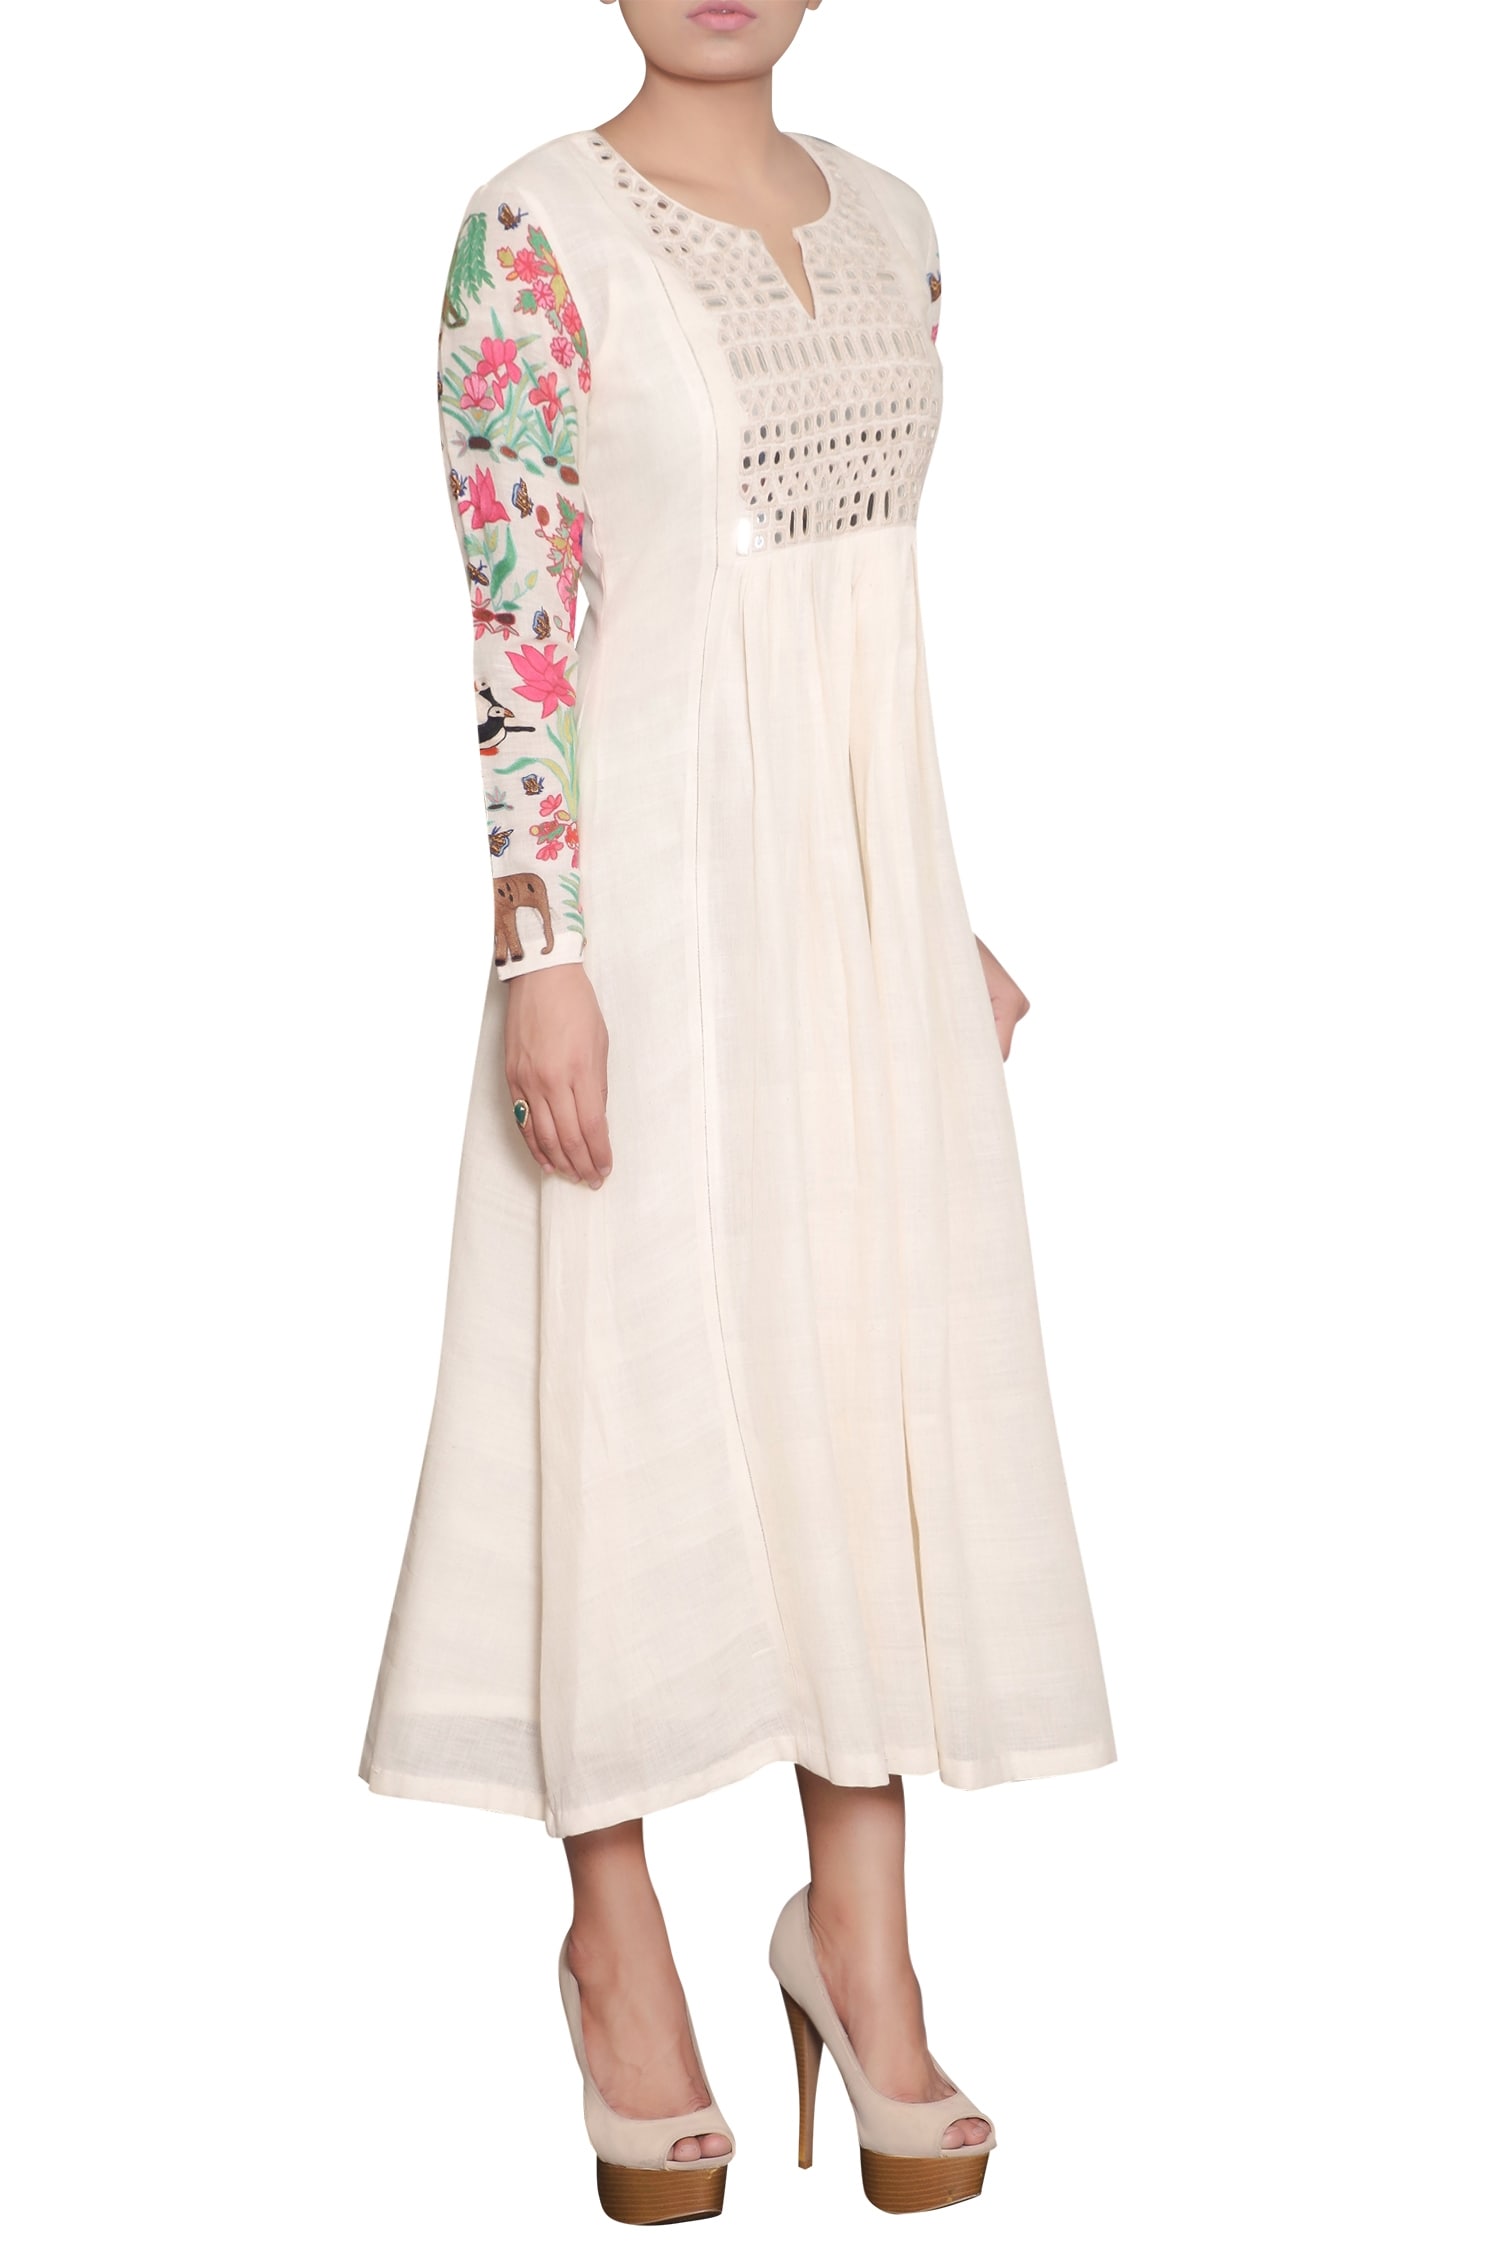 Buy Mirror Embroidered Front Gathered Dress by Purvi Doshi at Aza Fashions